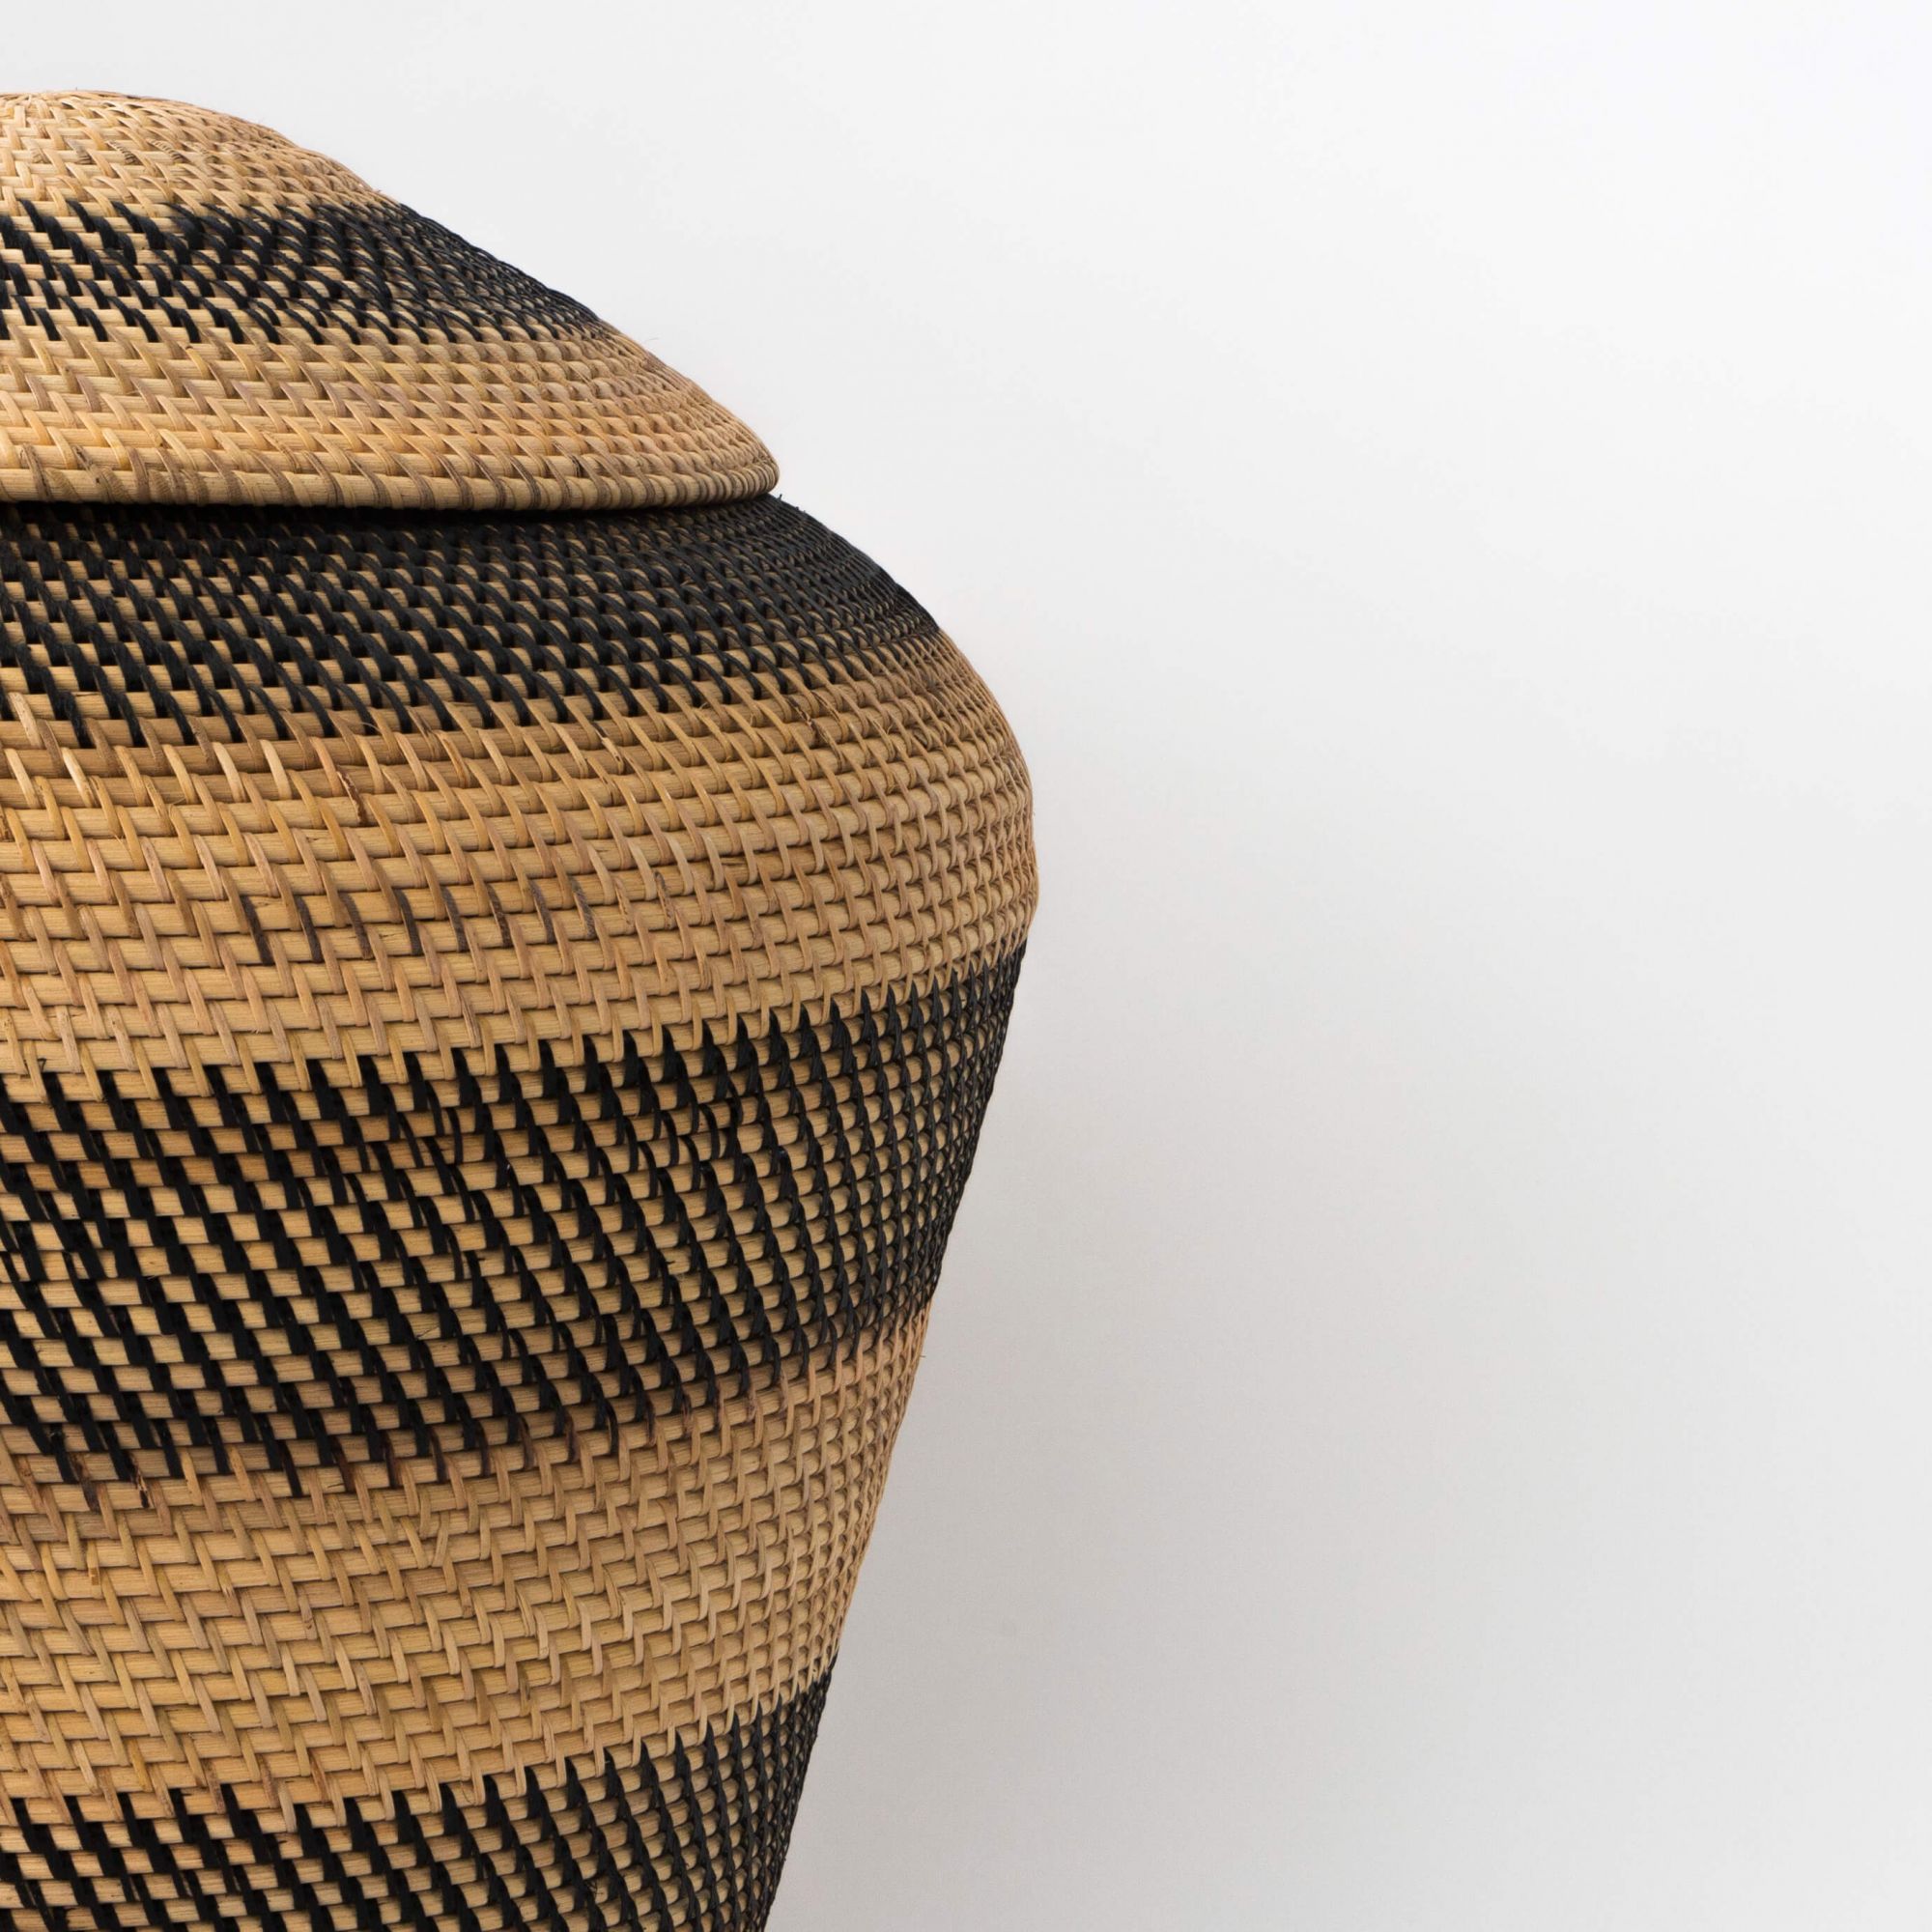 Malay Zebra Pot in Natural & Charcoal